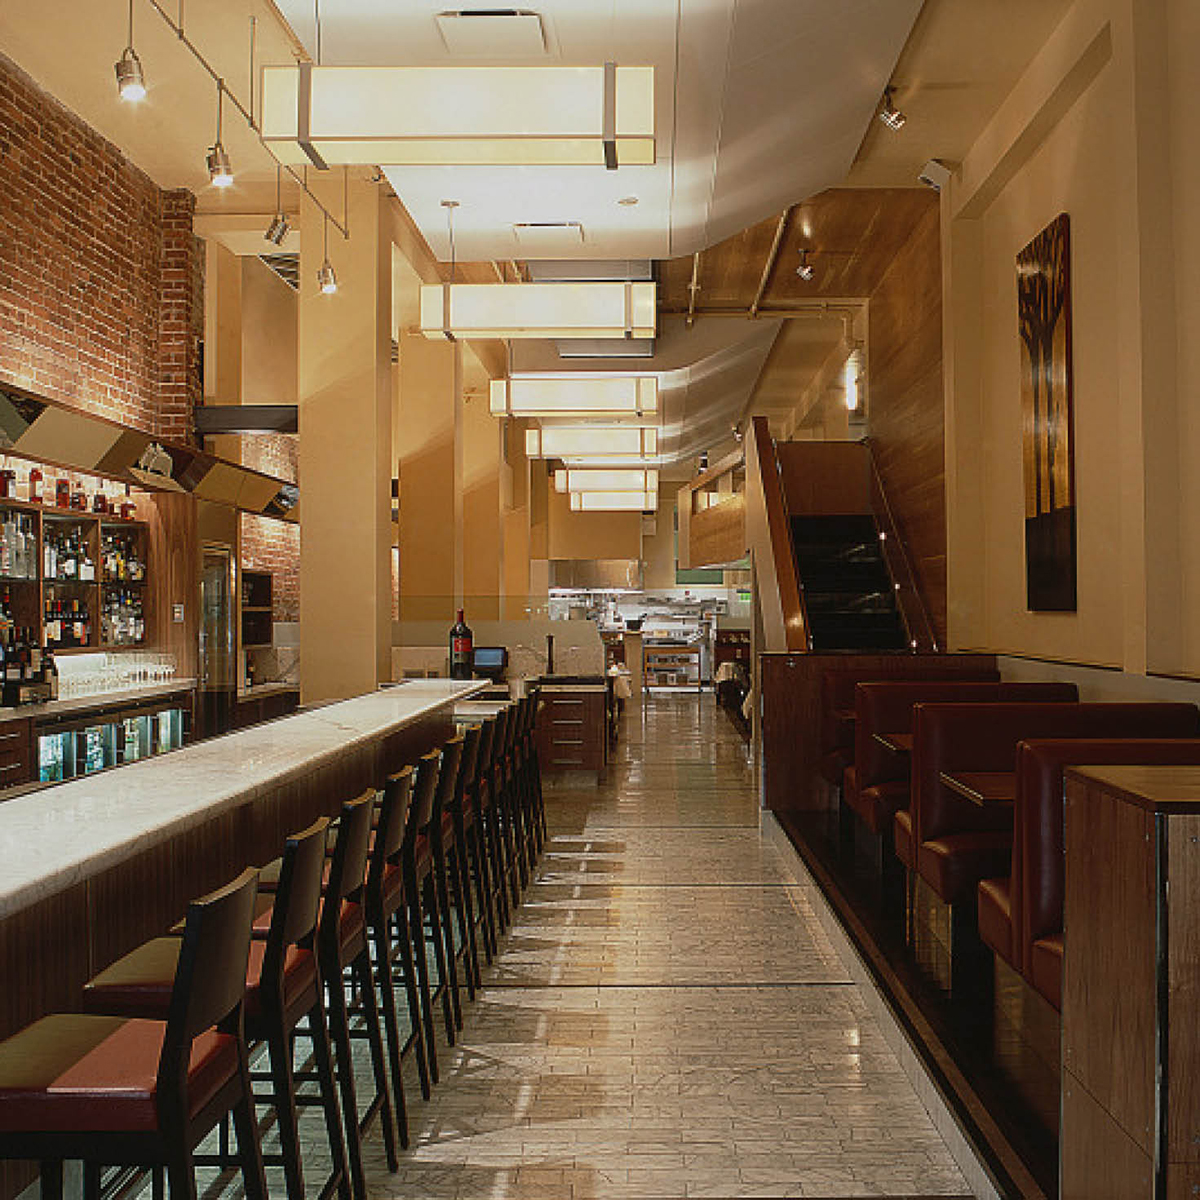 Cass Calder Smith specified Lumetta's ambient lighting for this installation at Perbacco Restaurant in San Francisco.